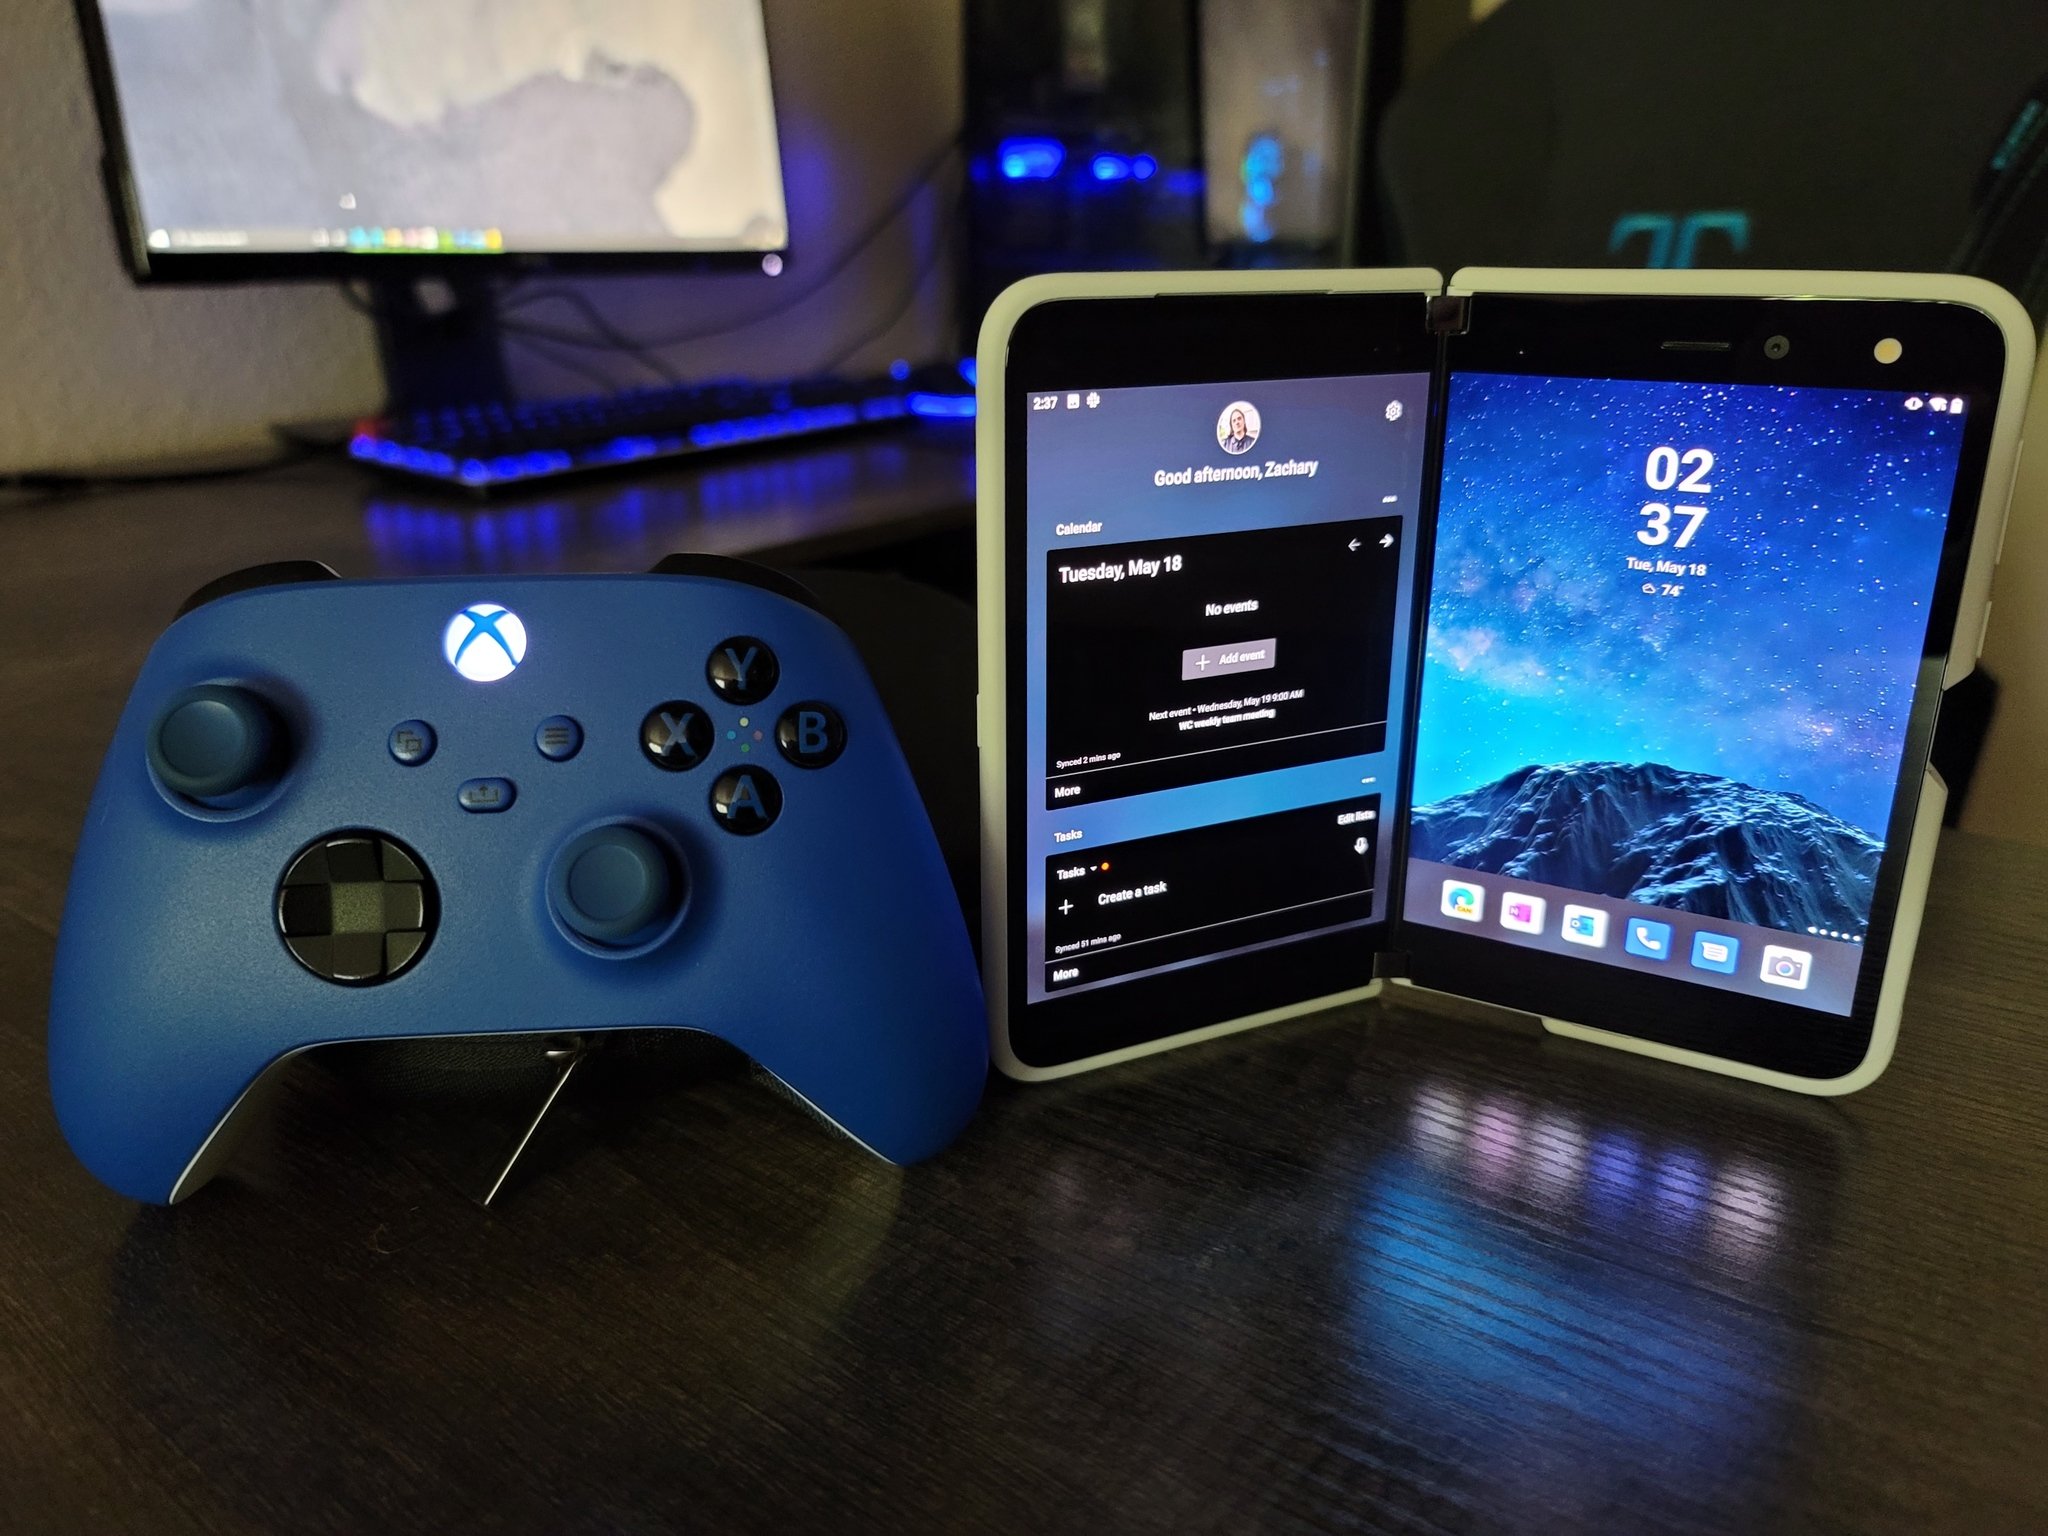 Handheld Xbox created by Microsoft after turning Surface Duo